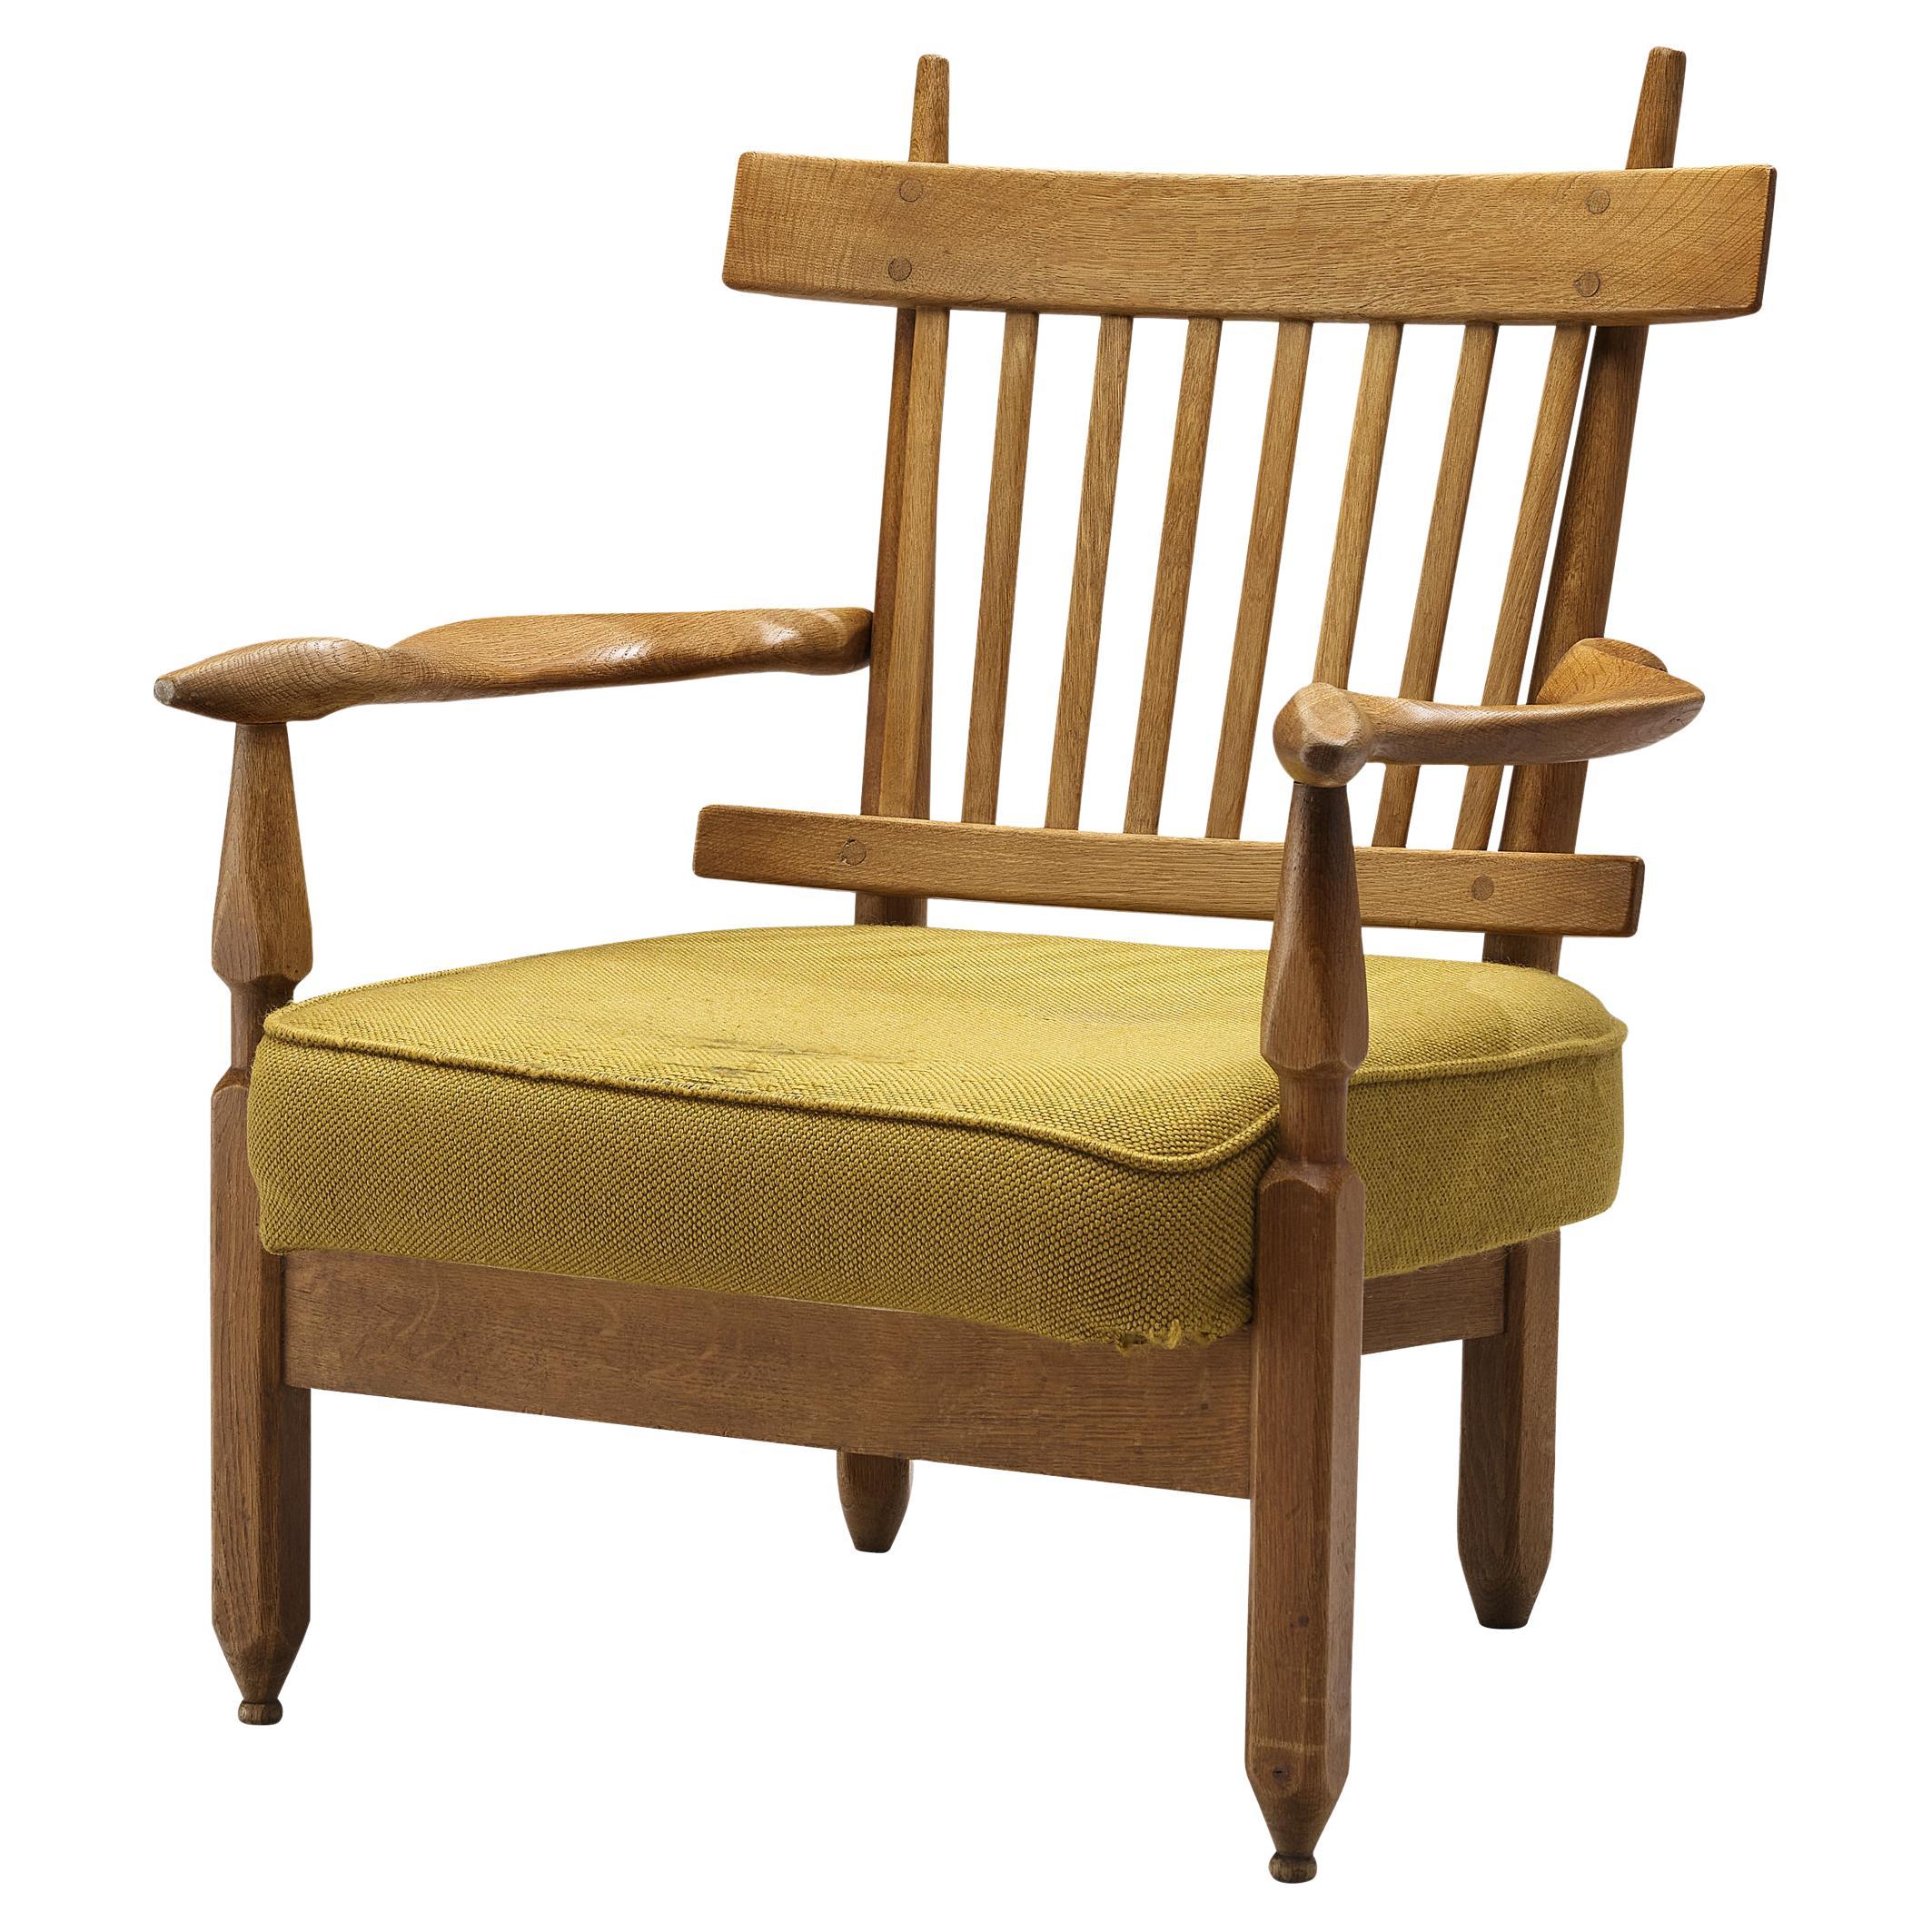 Guillerme & Chambron "Petronille" Lounge Chair in Oak and Yellow Upholstery For Sale